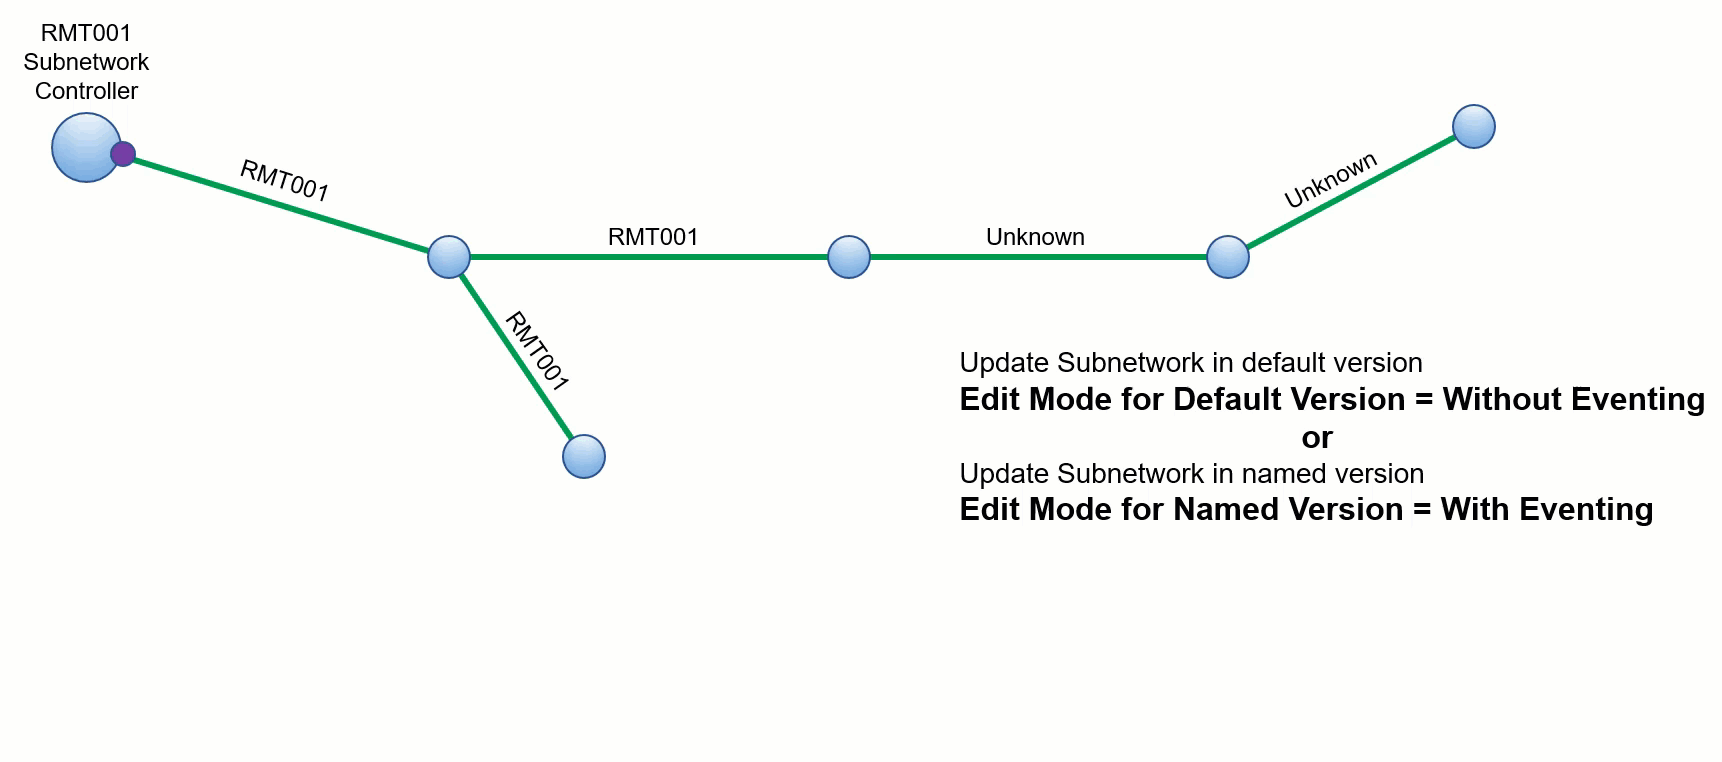 Update subnetwork operation run in the default version (With Eventing and Without Eventing) and in a named version using With Eventing.